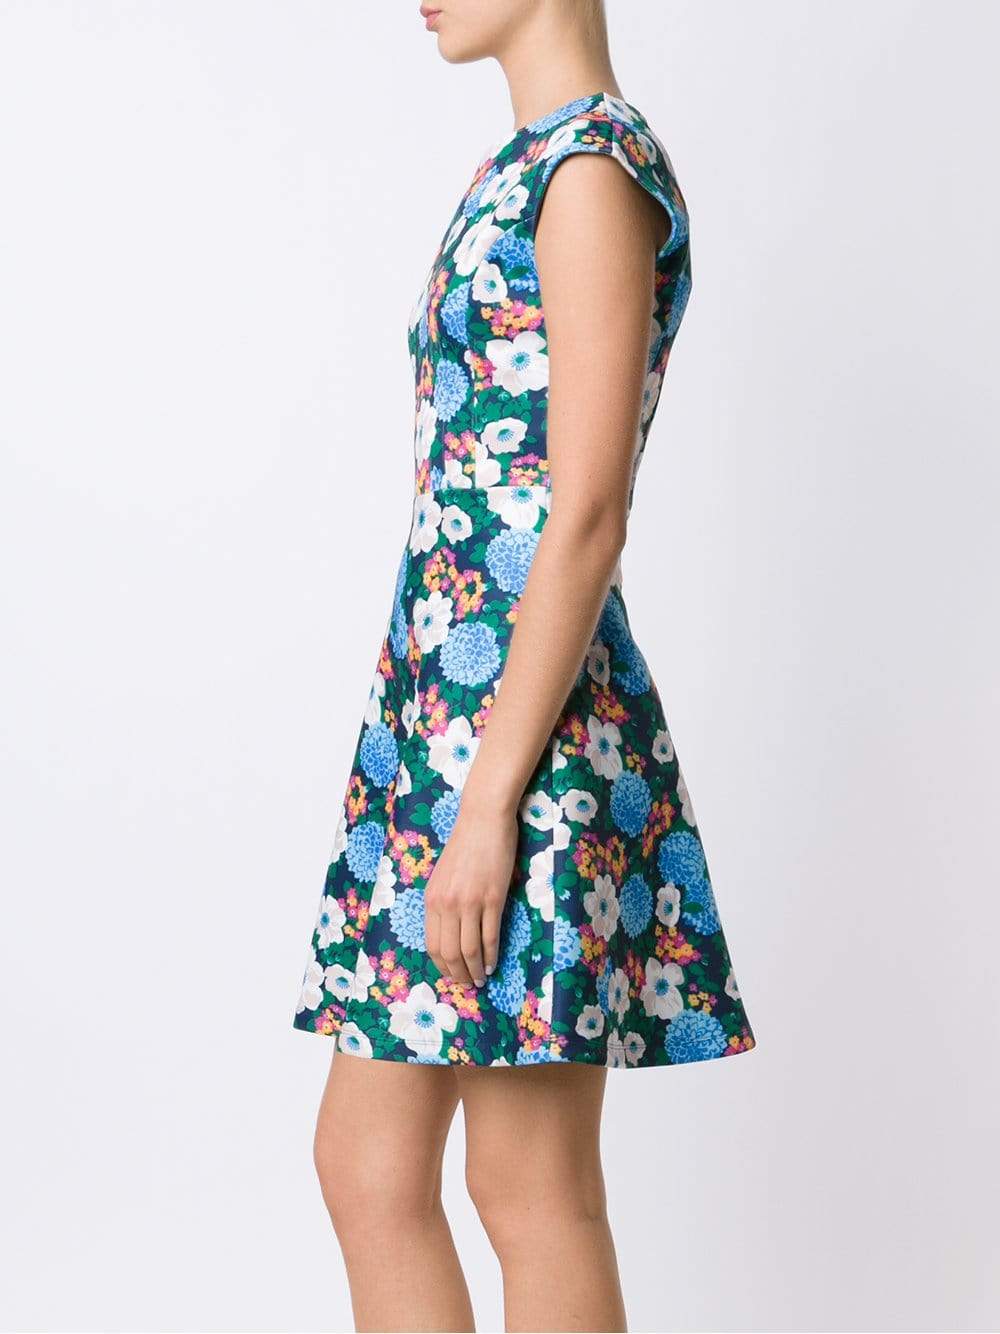 CARVEN-Floral Fit And Flare Dress-